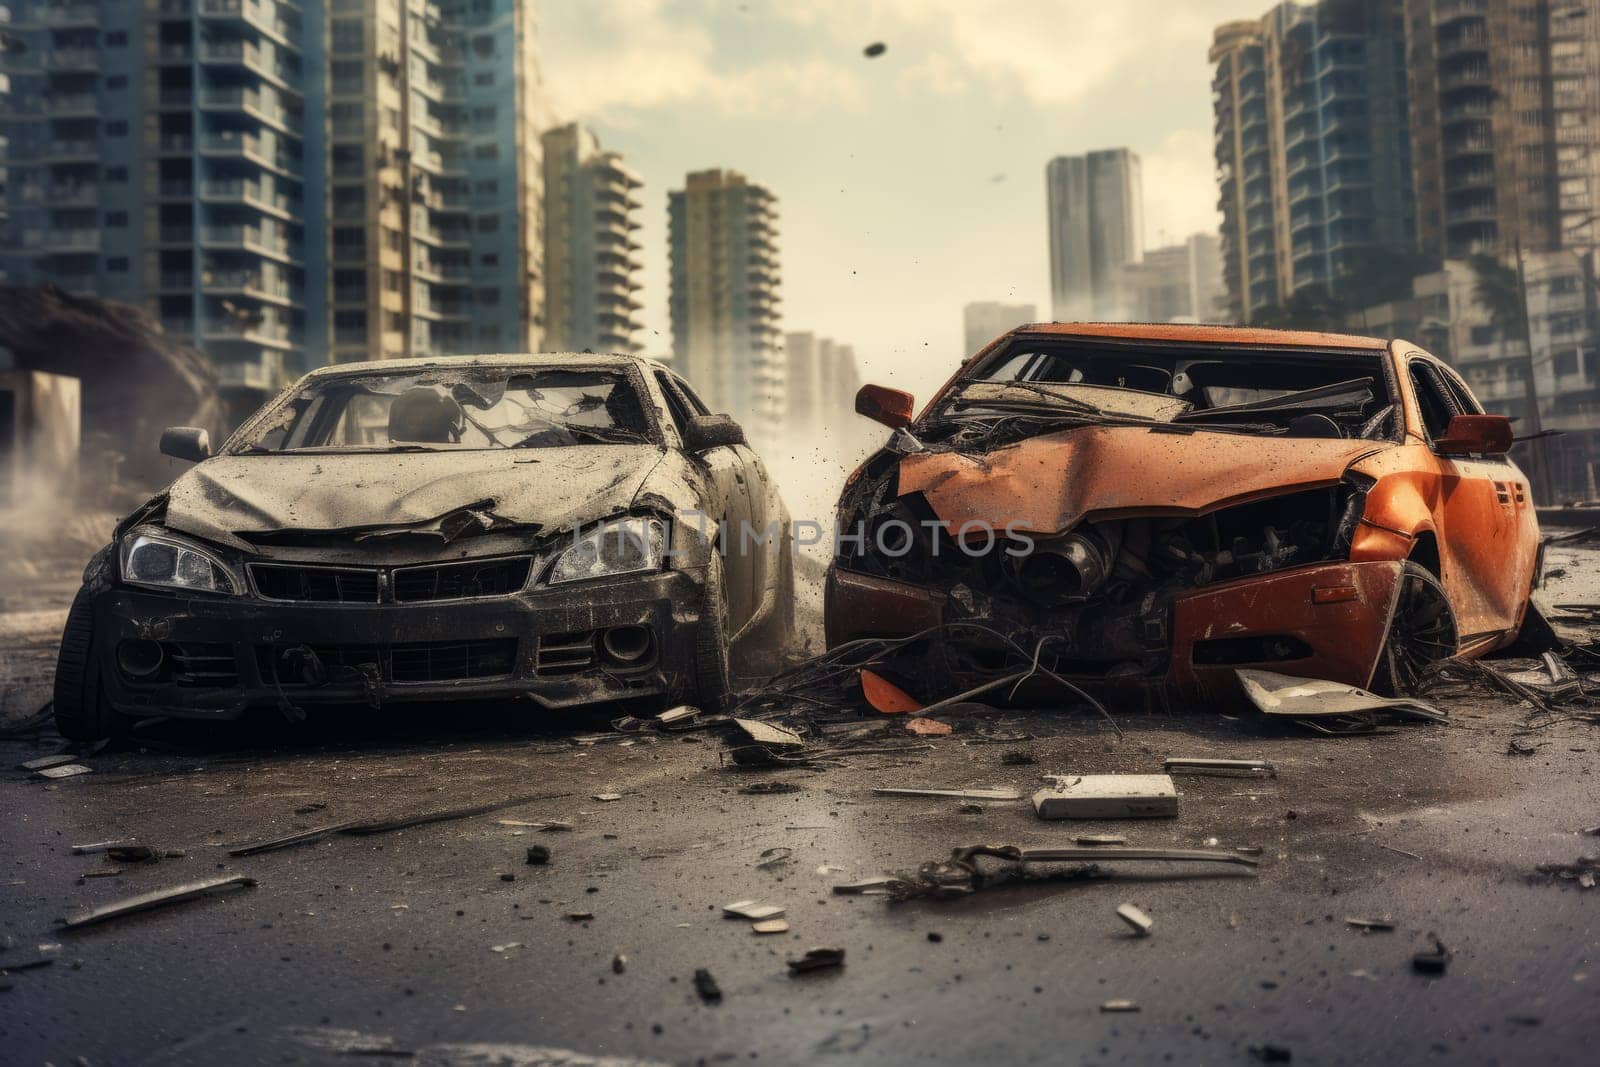 Two cars crashed on road in the ruined city. Post-apocalyptic concept of the end of the world or war and destruction